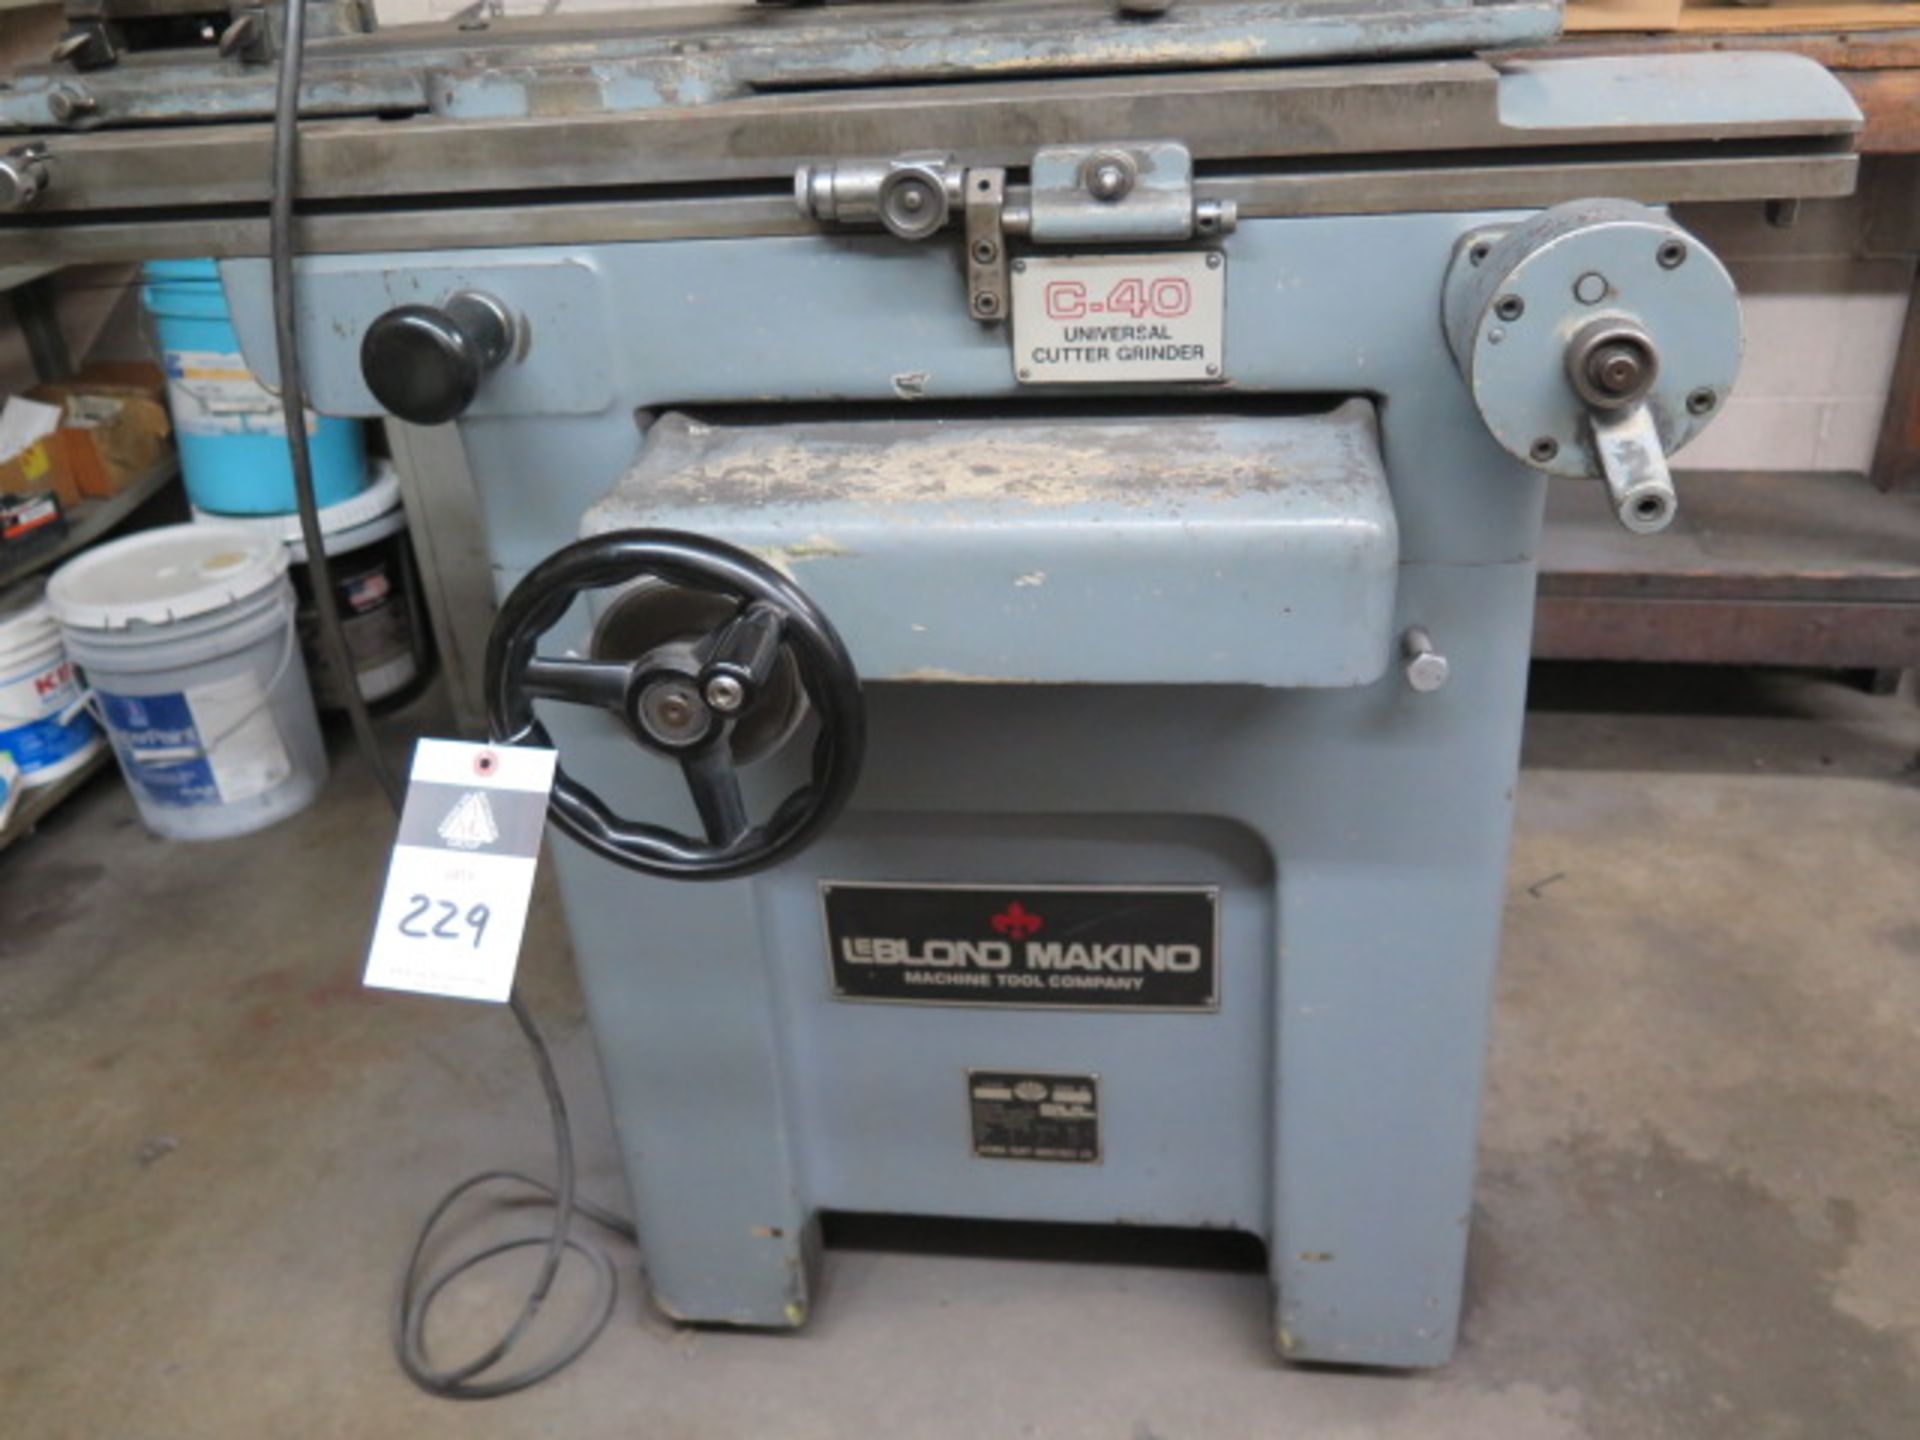 LeBlond Makino C-40 Universal Tool &Cutter Grinder s/n 81-0027 w/ Compound Grinding Head, SOLD AS IS - Image 3 of 12